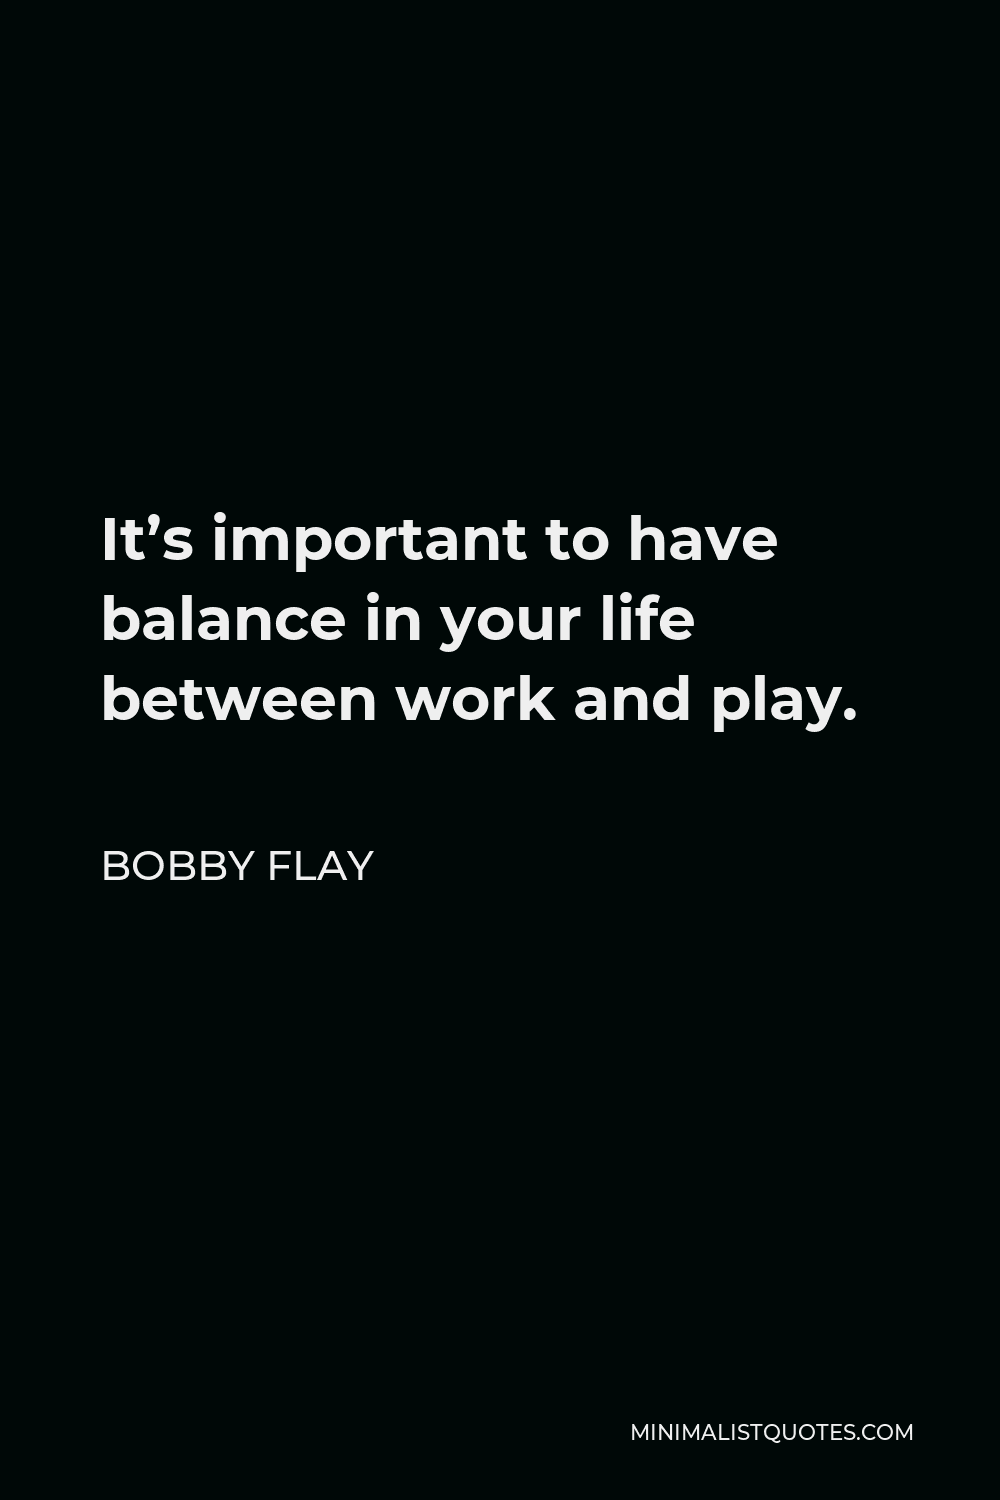 Bobby Flay Quote - It’s important to have balance in your life between work and play.